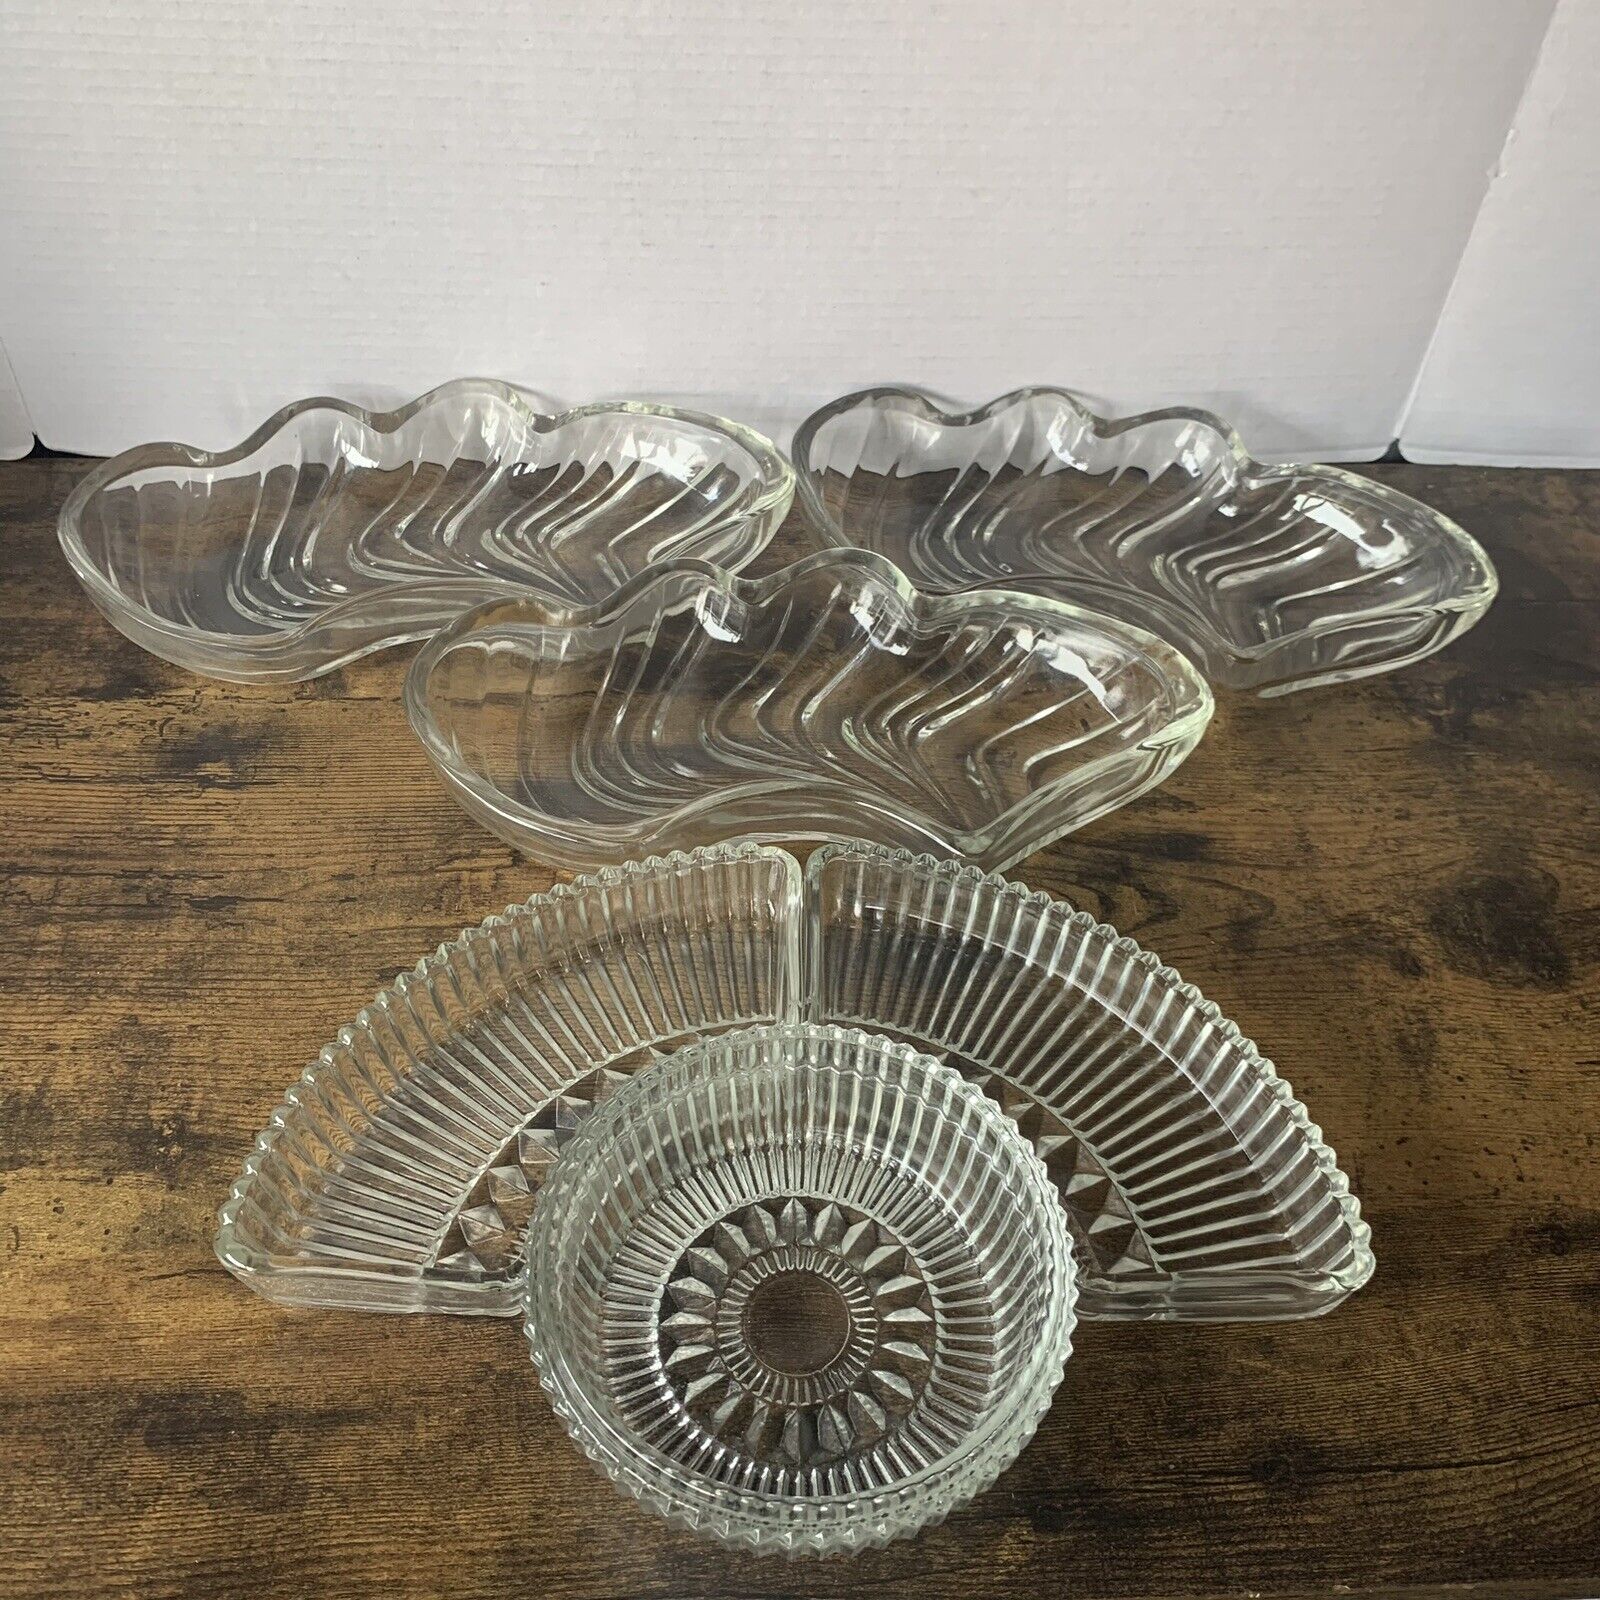 Rare Antique 6 Piece Glassware Set New With Boxes Lazy Susan, Bowl, Crystal